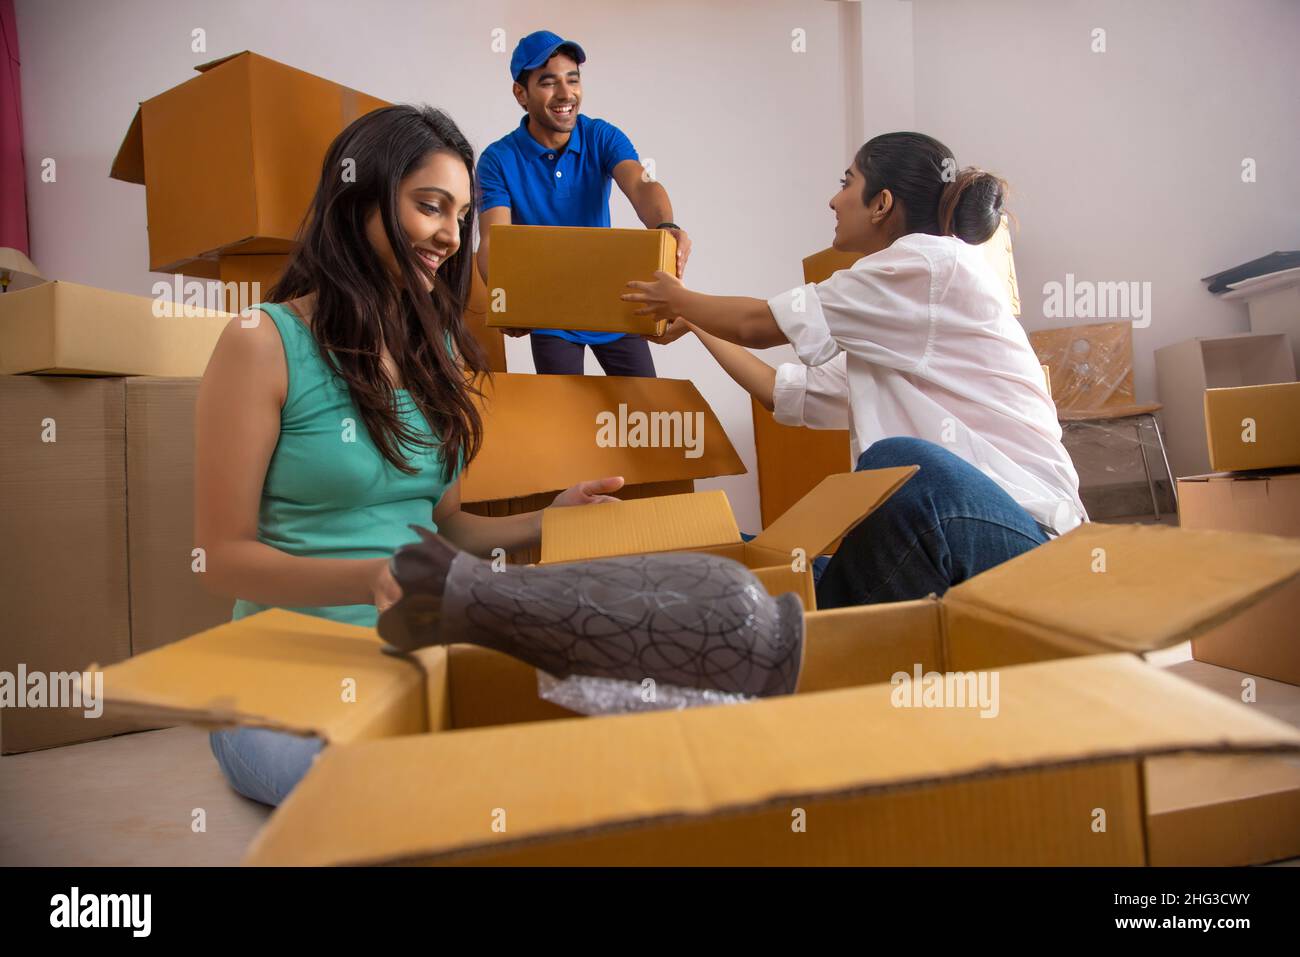 https://c8.alamy.com/comp/2HG3CWY/girls-packing-household-goods-and-handing-over-box-to-the-boy-for-stacking-2HG3CWY.jpg